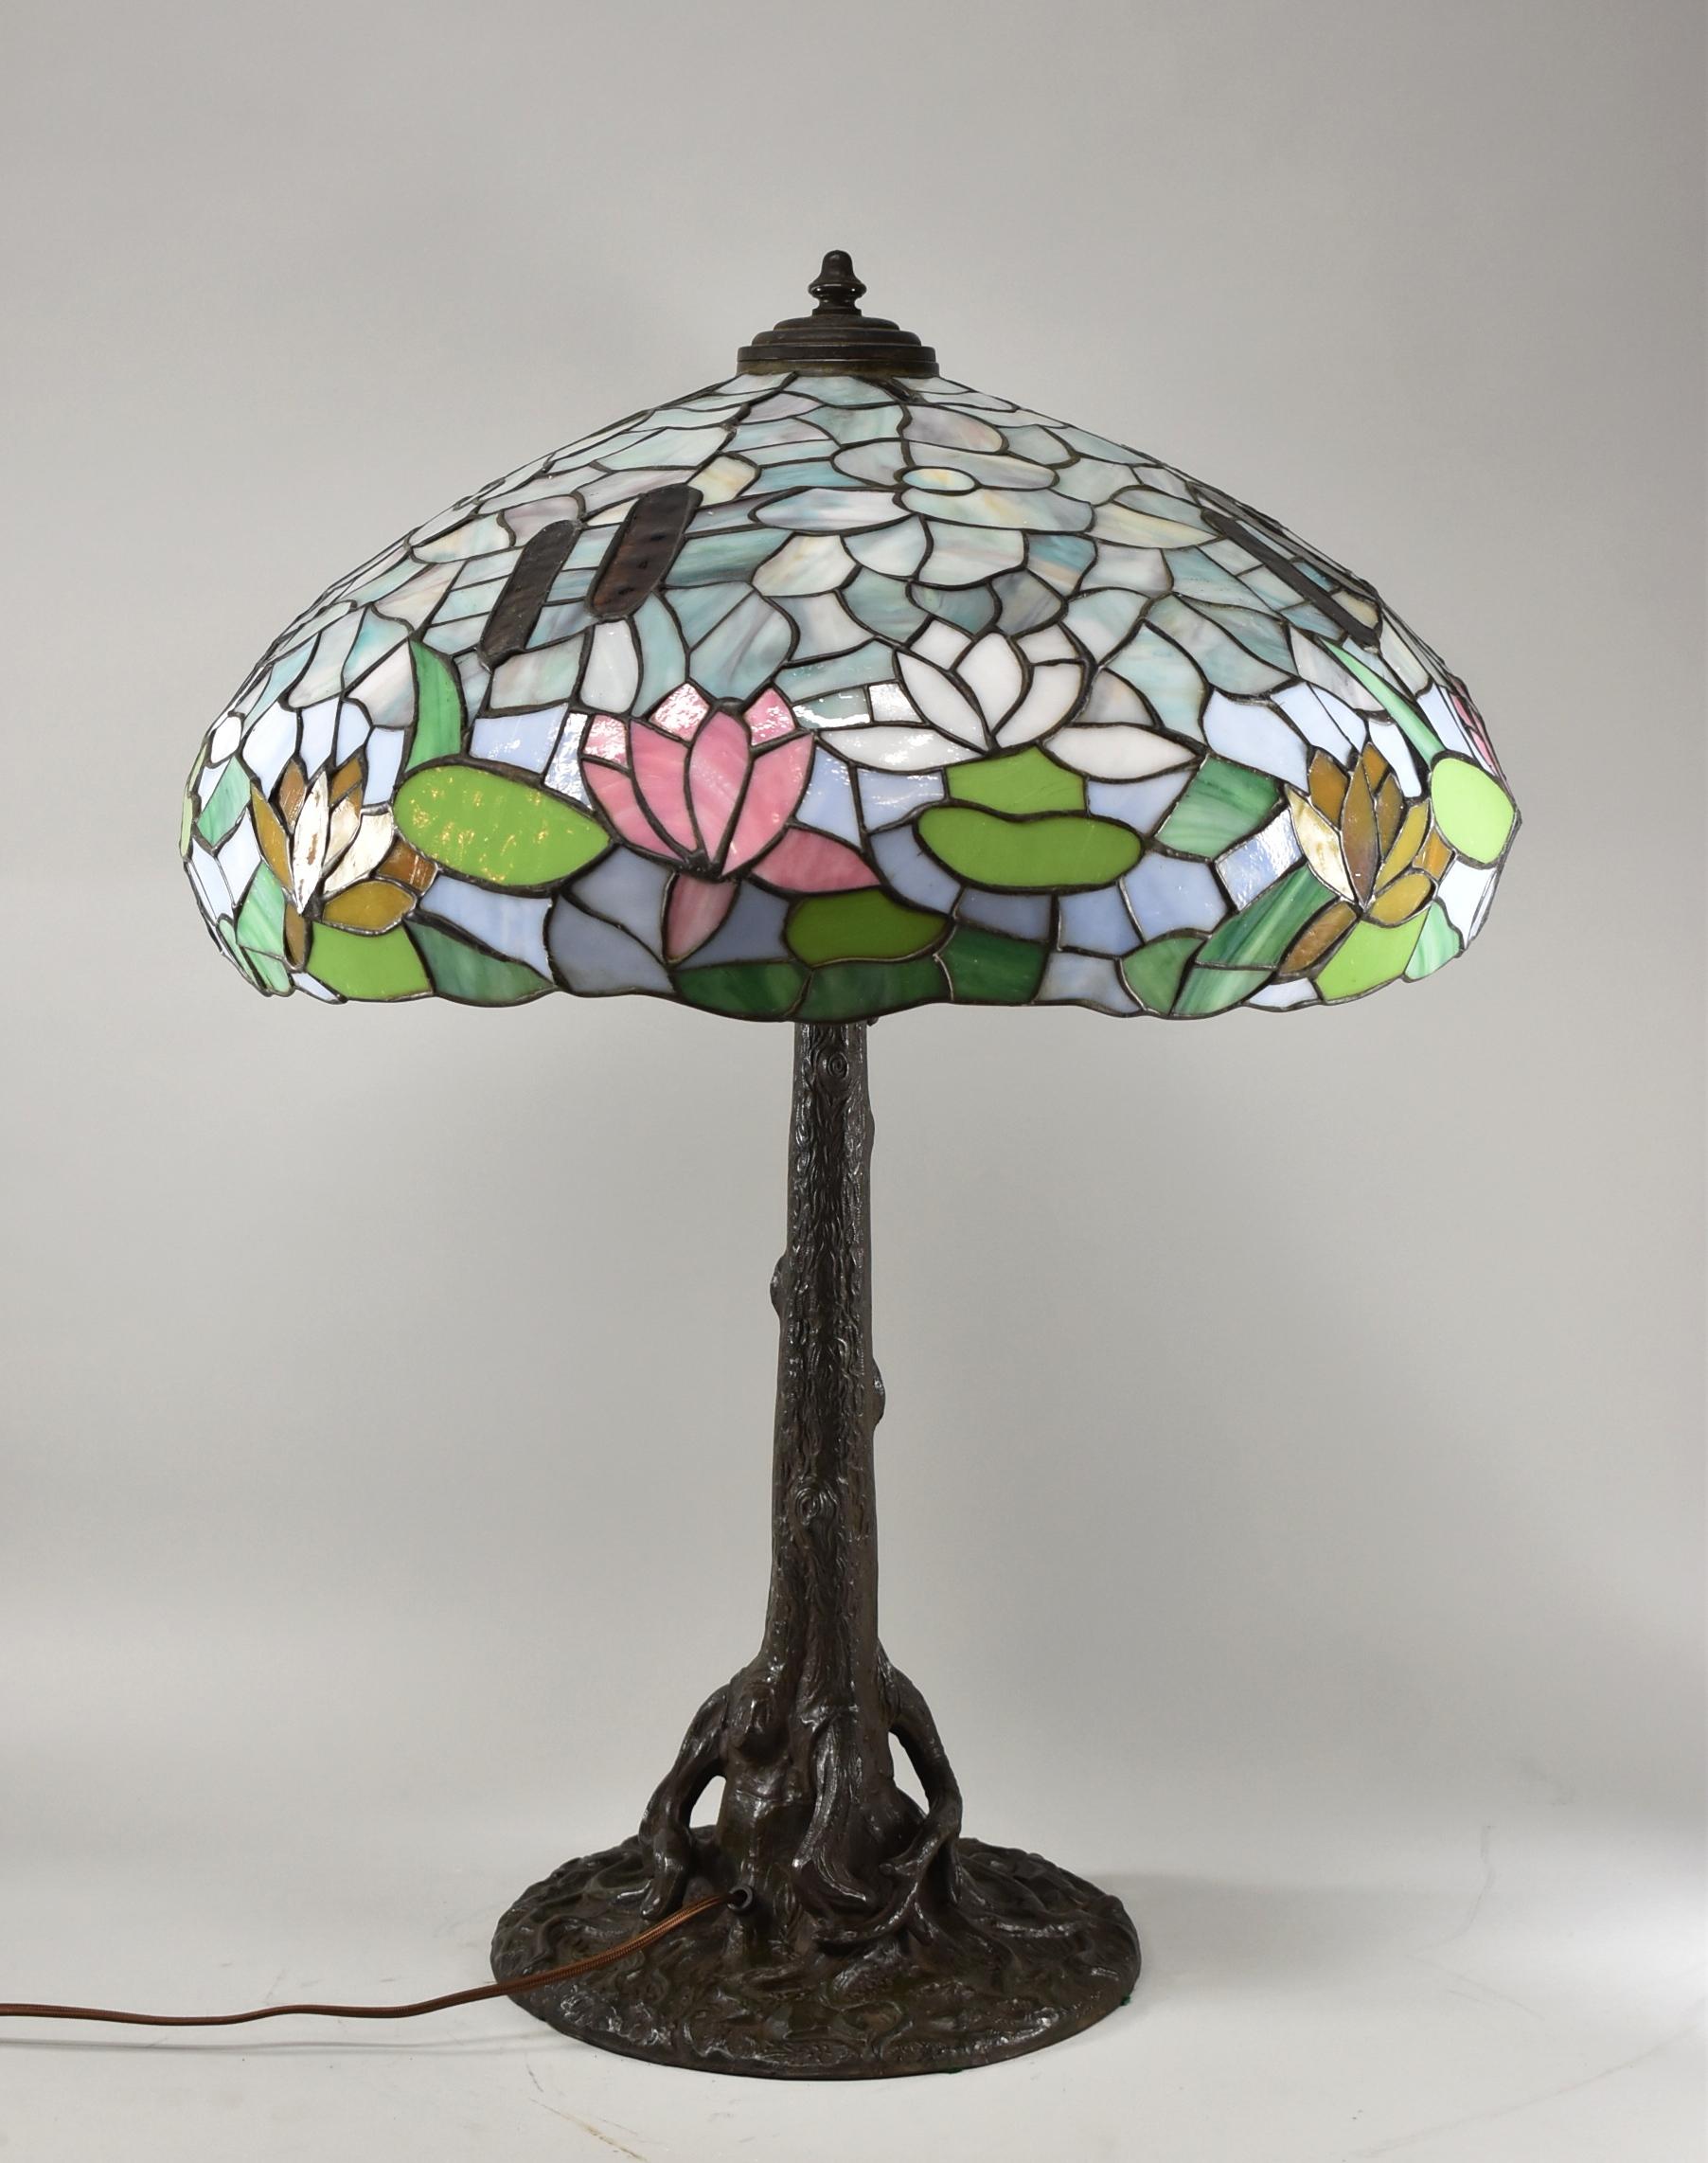 Antique tree trunk base with stained glass Wilkinson shade cattails & water lilies. Acorn pull chains. Three sockets. Shade has a photo in Mosaic Shades Volume II by Paul Christ book.